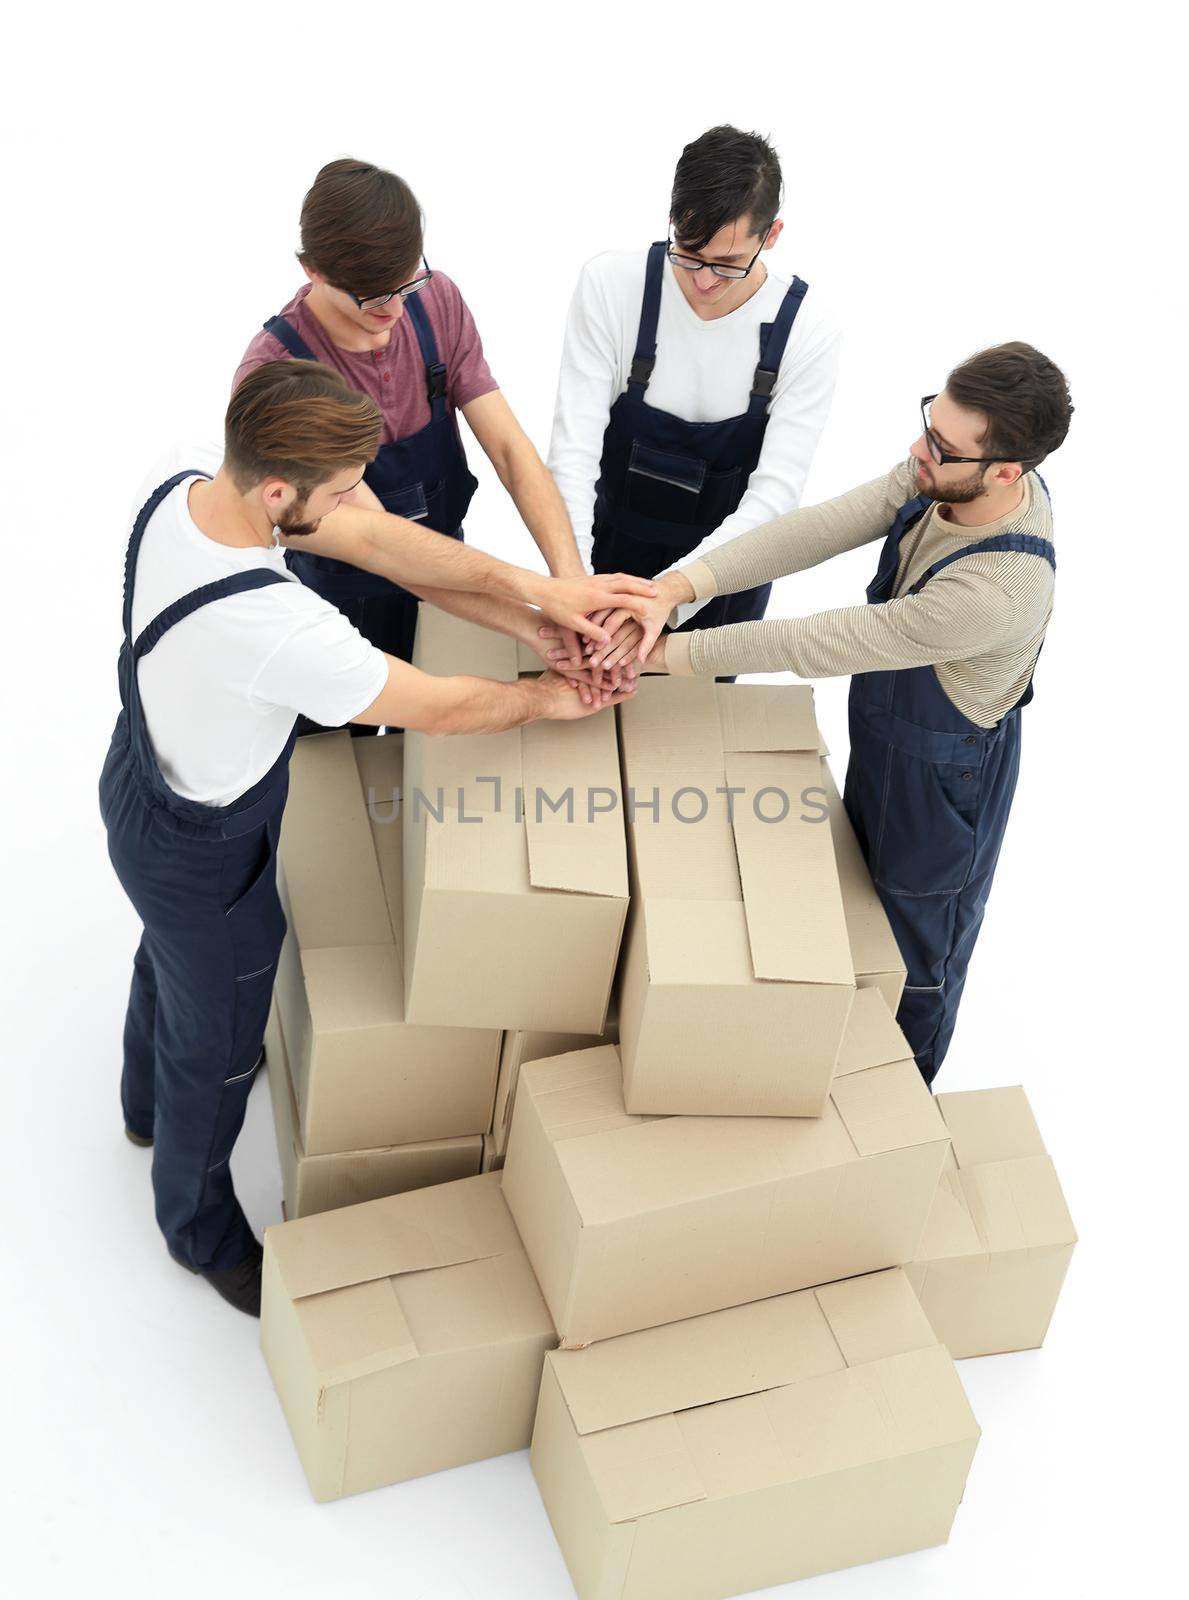 Cheerful movers leaning on stack of boxes isolated on white back by asdf